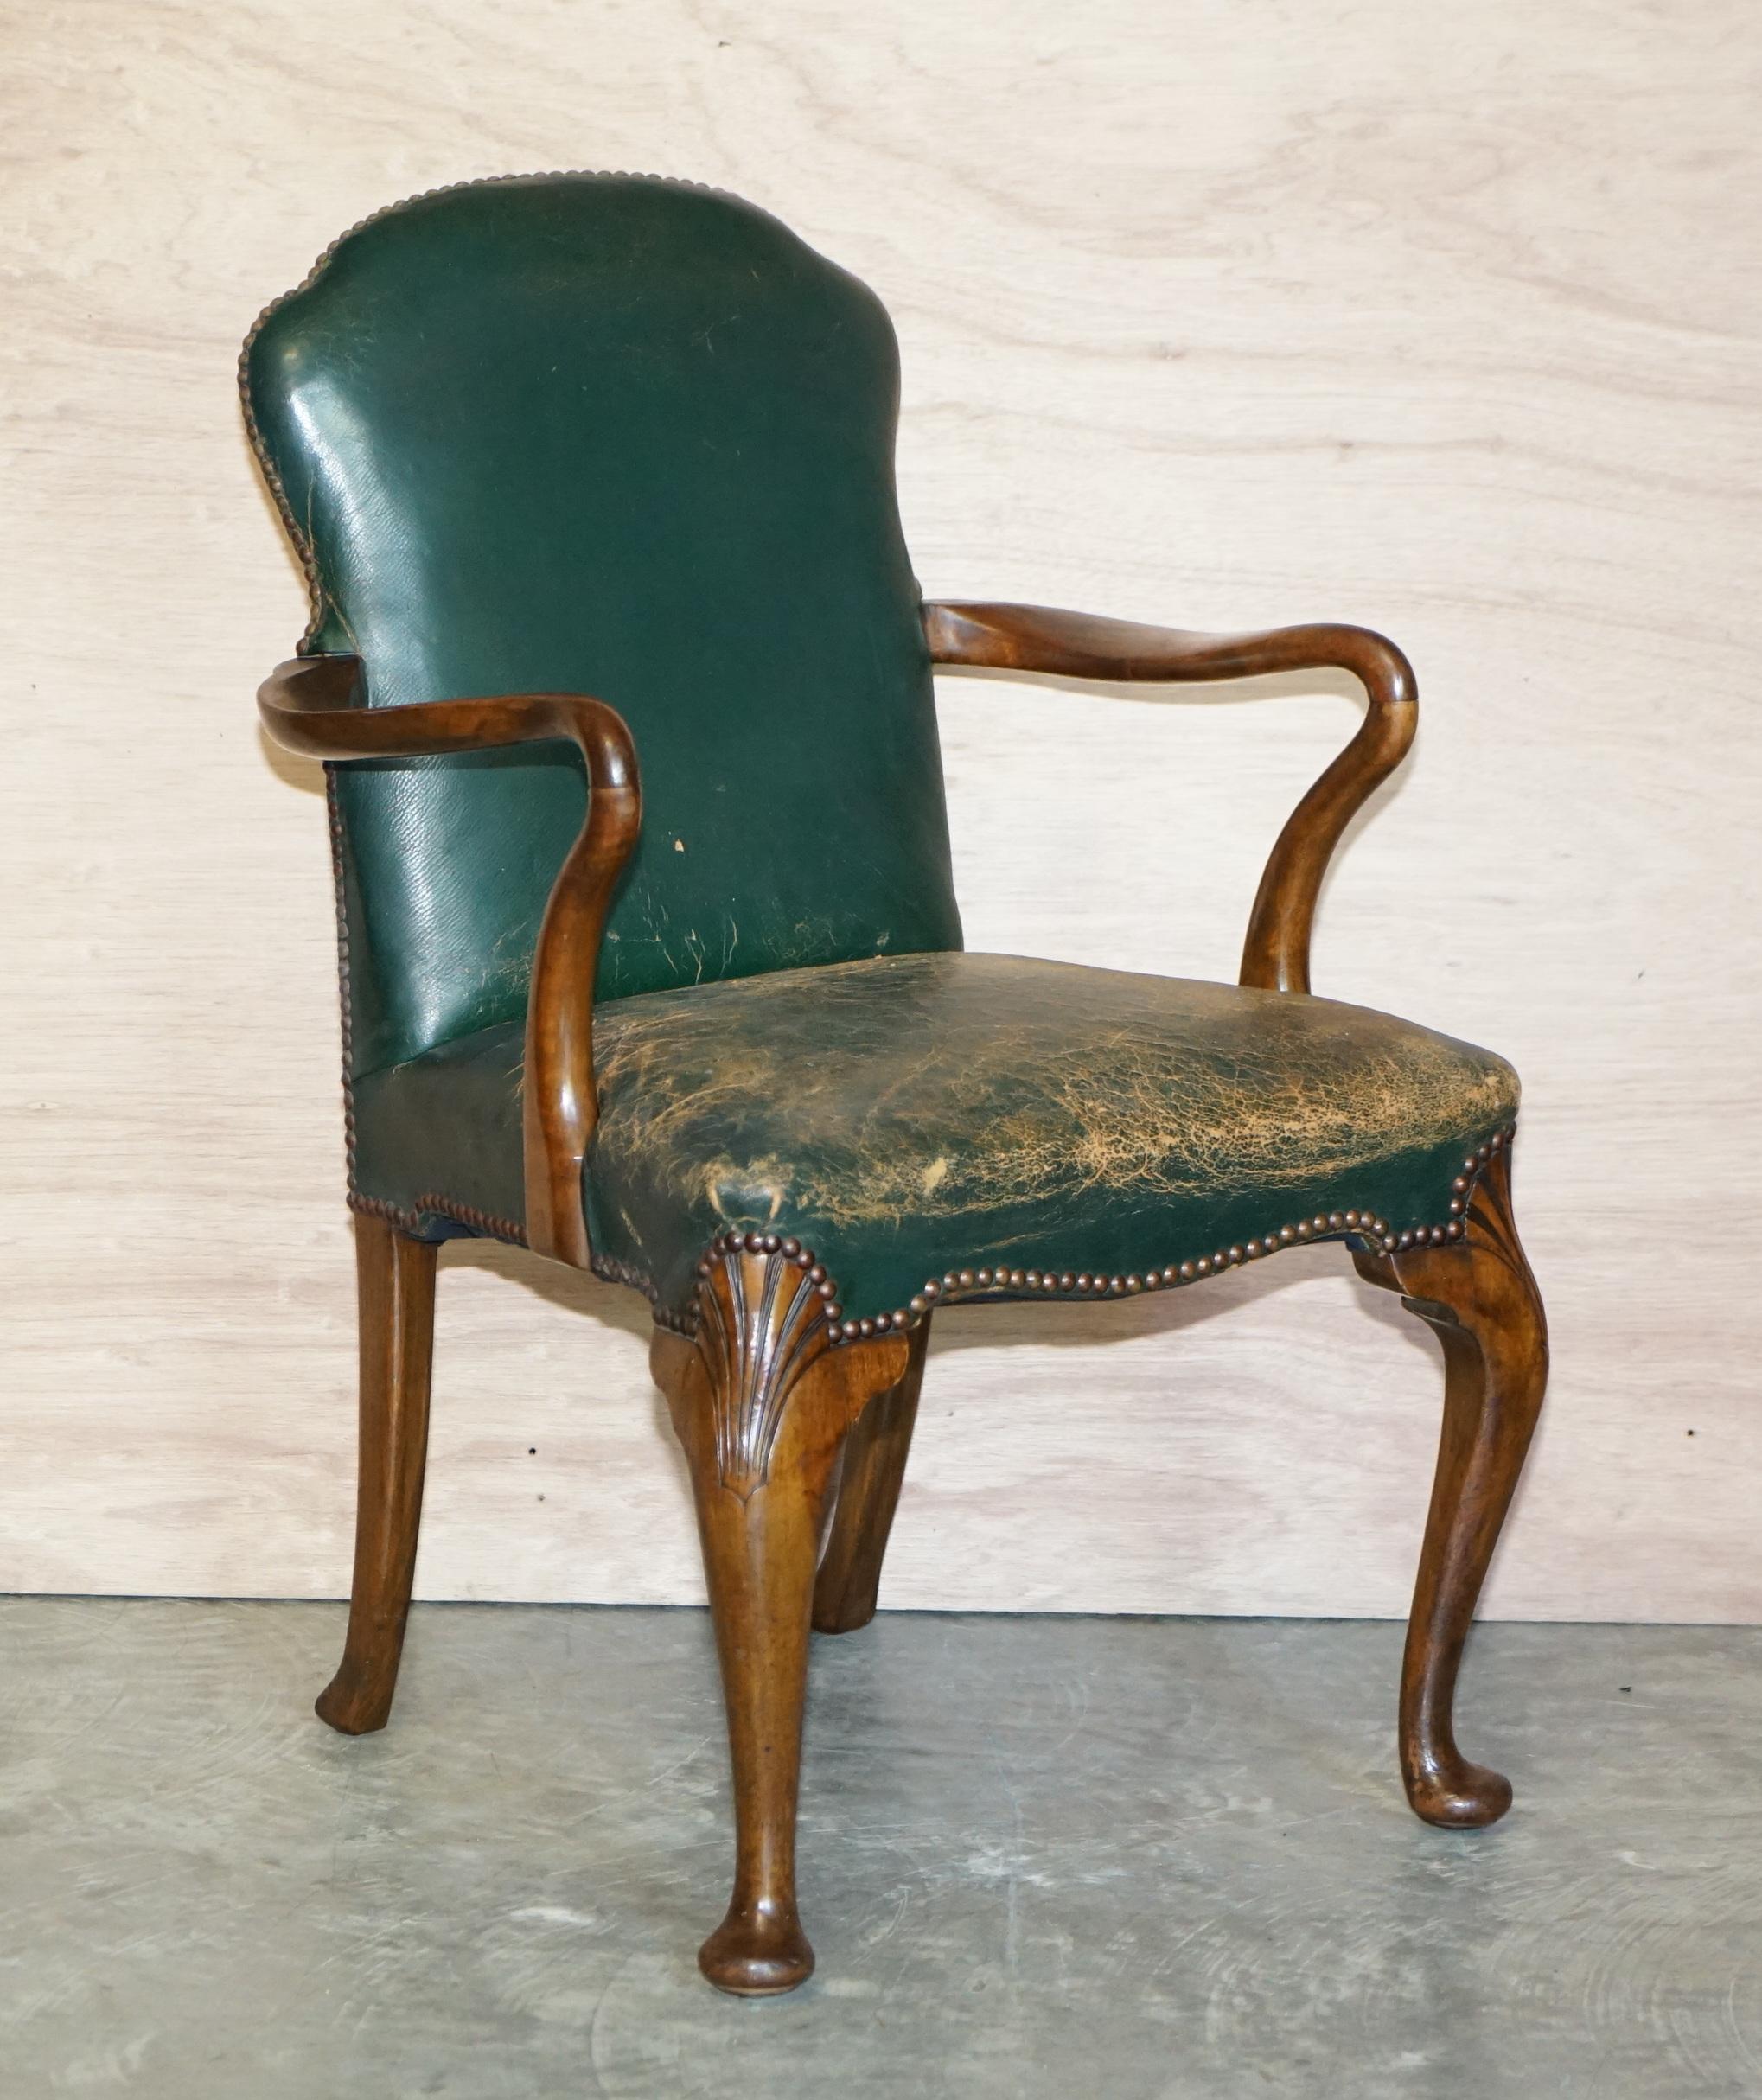 Royal House Antiques

Royal House Antiques is delighted to this suite of six original distressed green leather upholstery walnut framed Shepherds Crook arm dining chairs

I bought these chairs as a suite of 18, 12 of the chairs are being